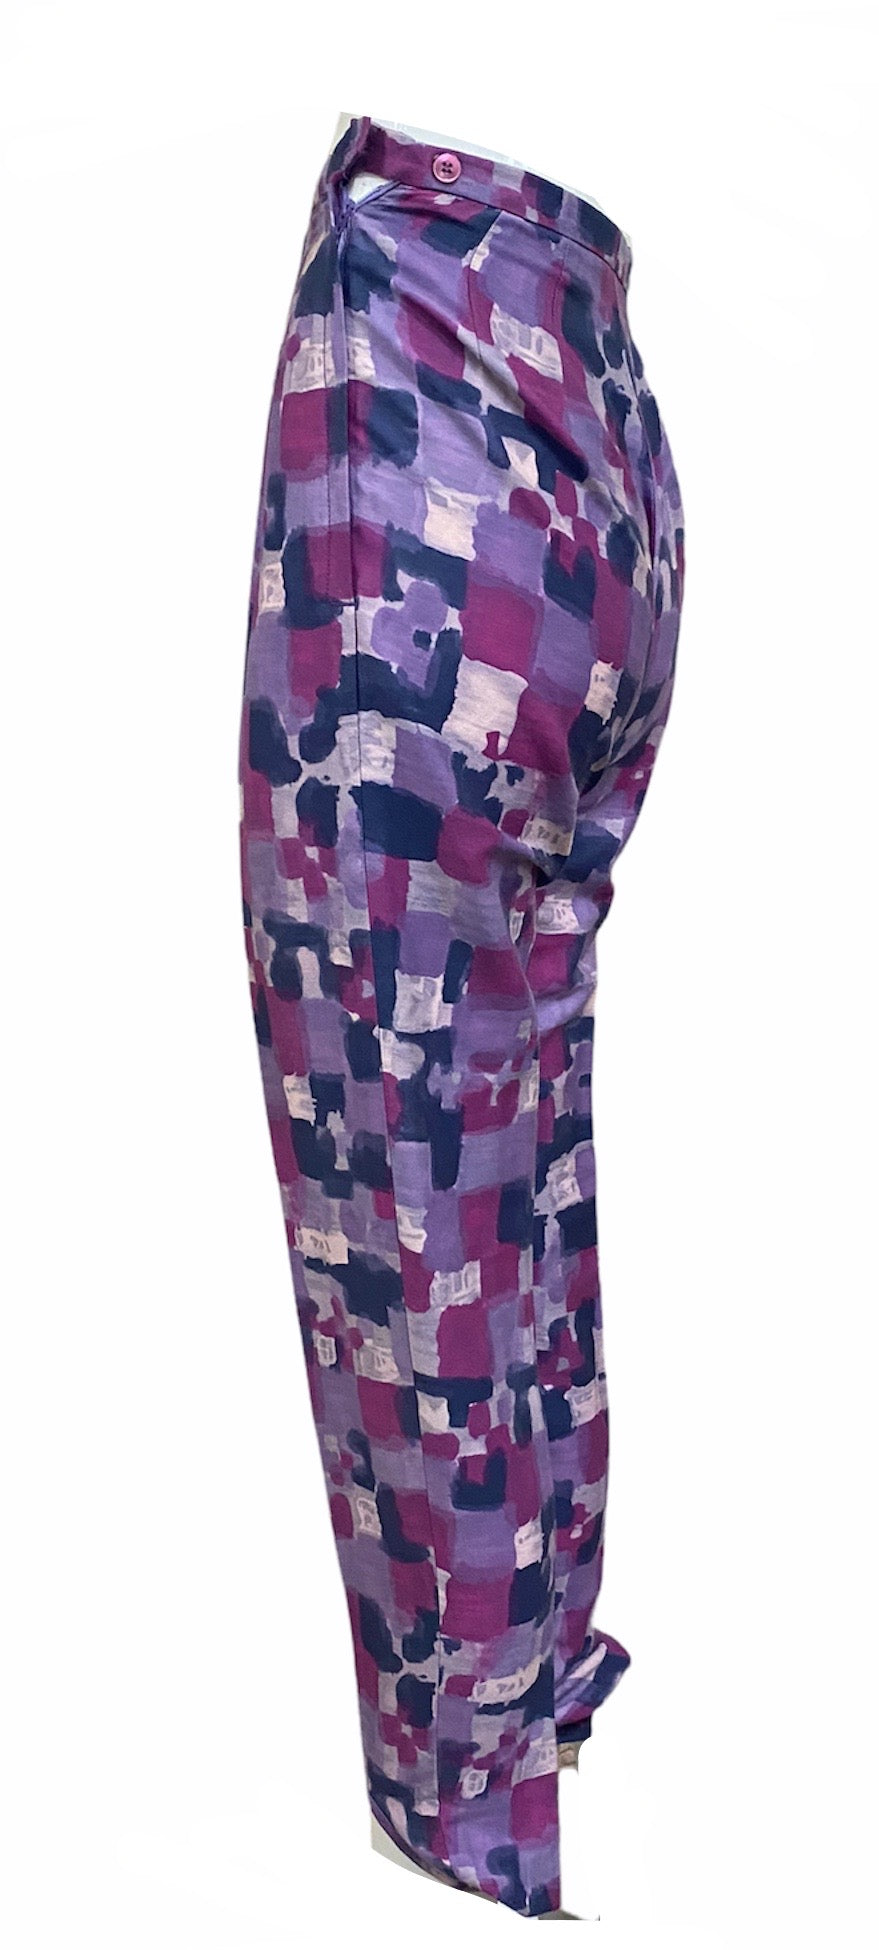   The Virtuoso Pant by White Stag 60s Purple Watercolor Print Apres Ski Pants SIDE 2 of 5